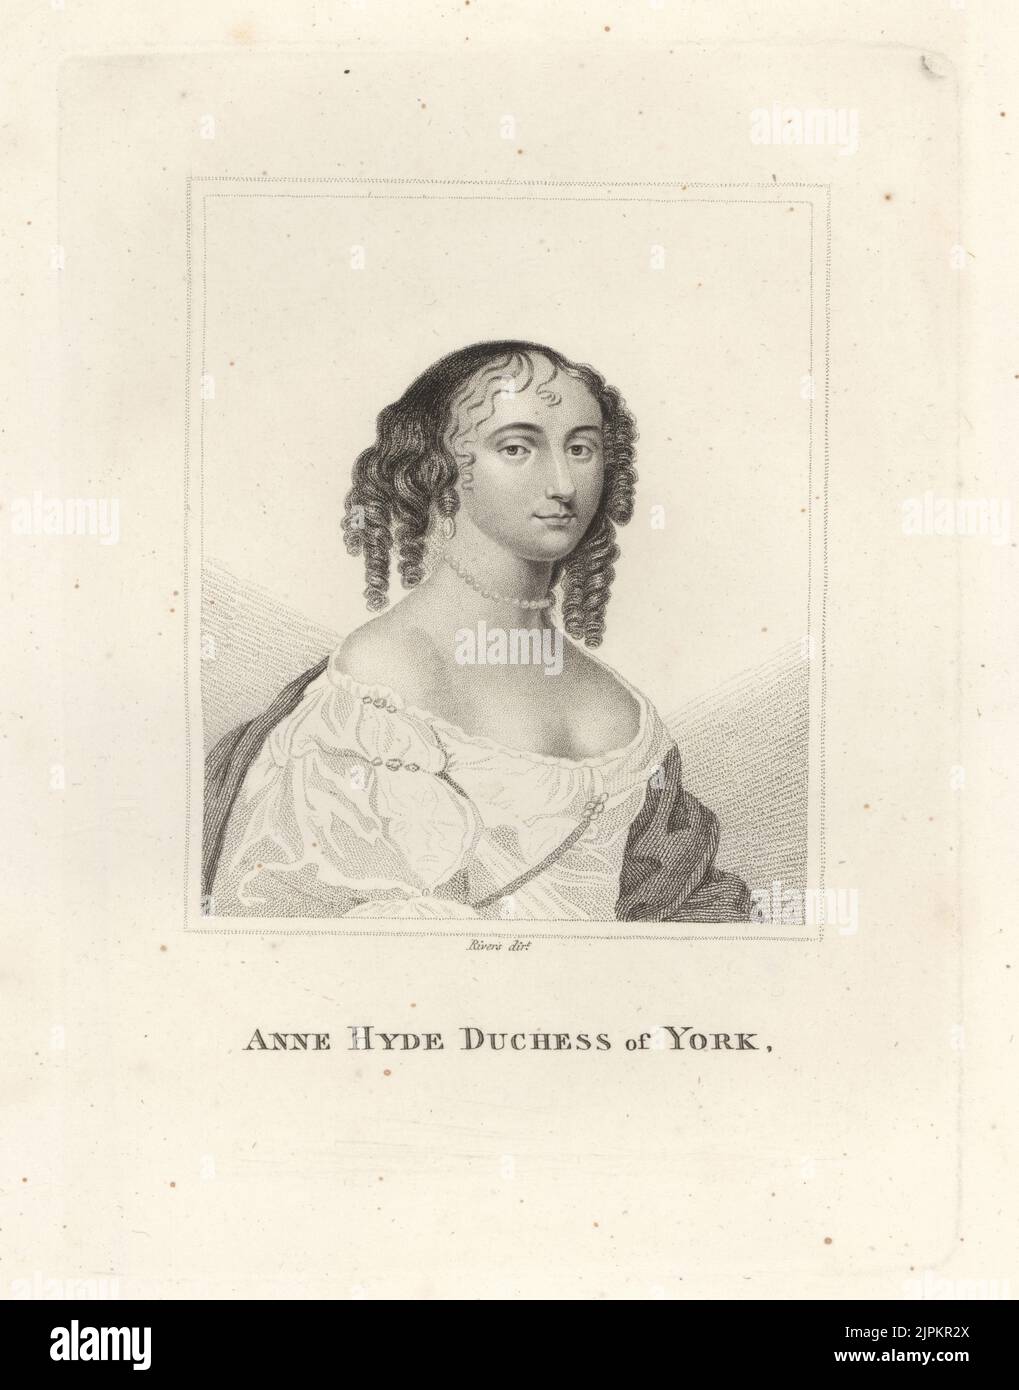 Anne Hyde, Duchess of York and Albany, 1637-1671. First wife of James, Duke of York, who later became King James II and VII of England and Scotland. With hair in ringlets, pearl necklace, low-cut  gown. From a drawing after Sir Peter Lely, engraved by Rivers.  Copperplate engraving from Samuel Woodburn’s Gallery of Rare Portraits Consisting of Original Plates, George Jones, 102 St Martin’s Lane, London, 1816. Stock Photo